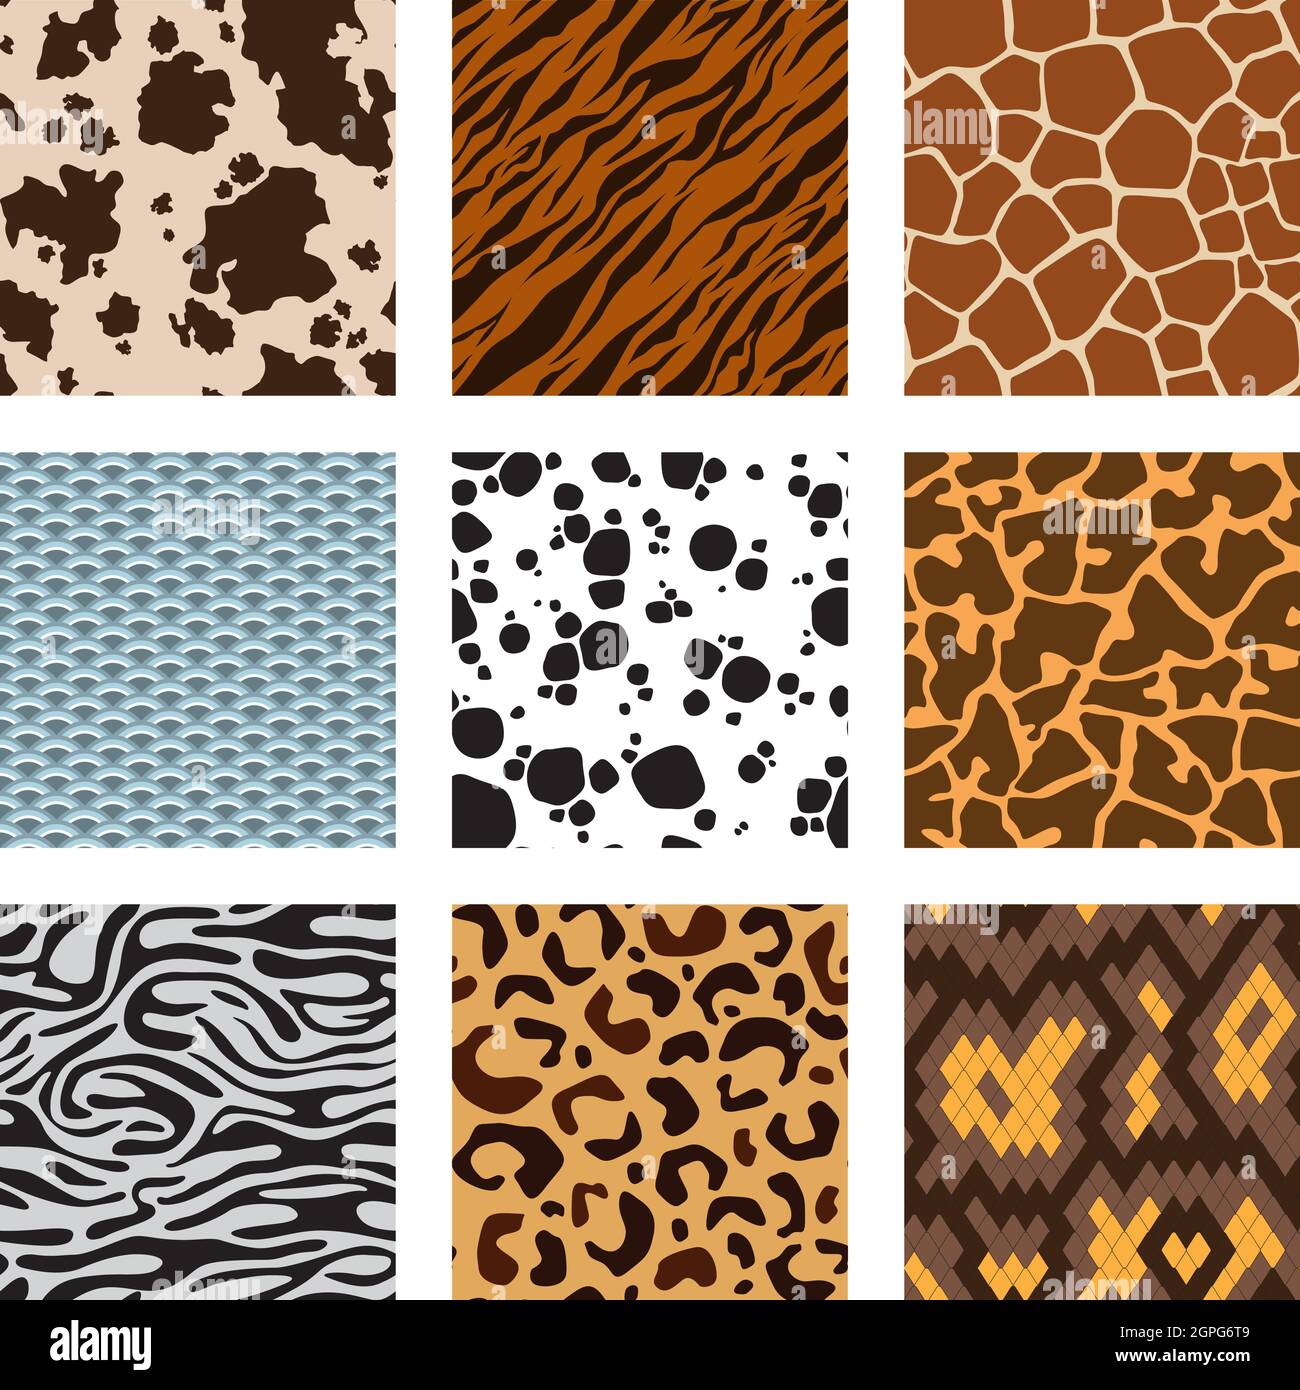 Leopard print background Cut Out Stock Images & Pictures - Alamy